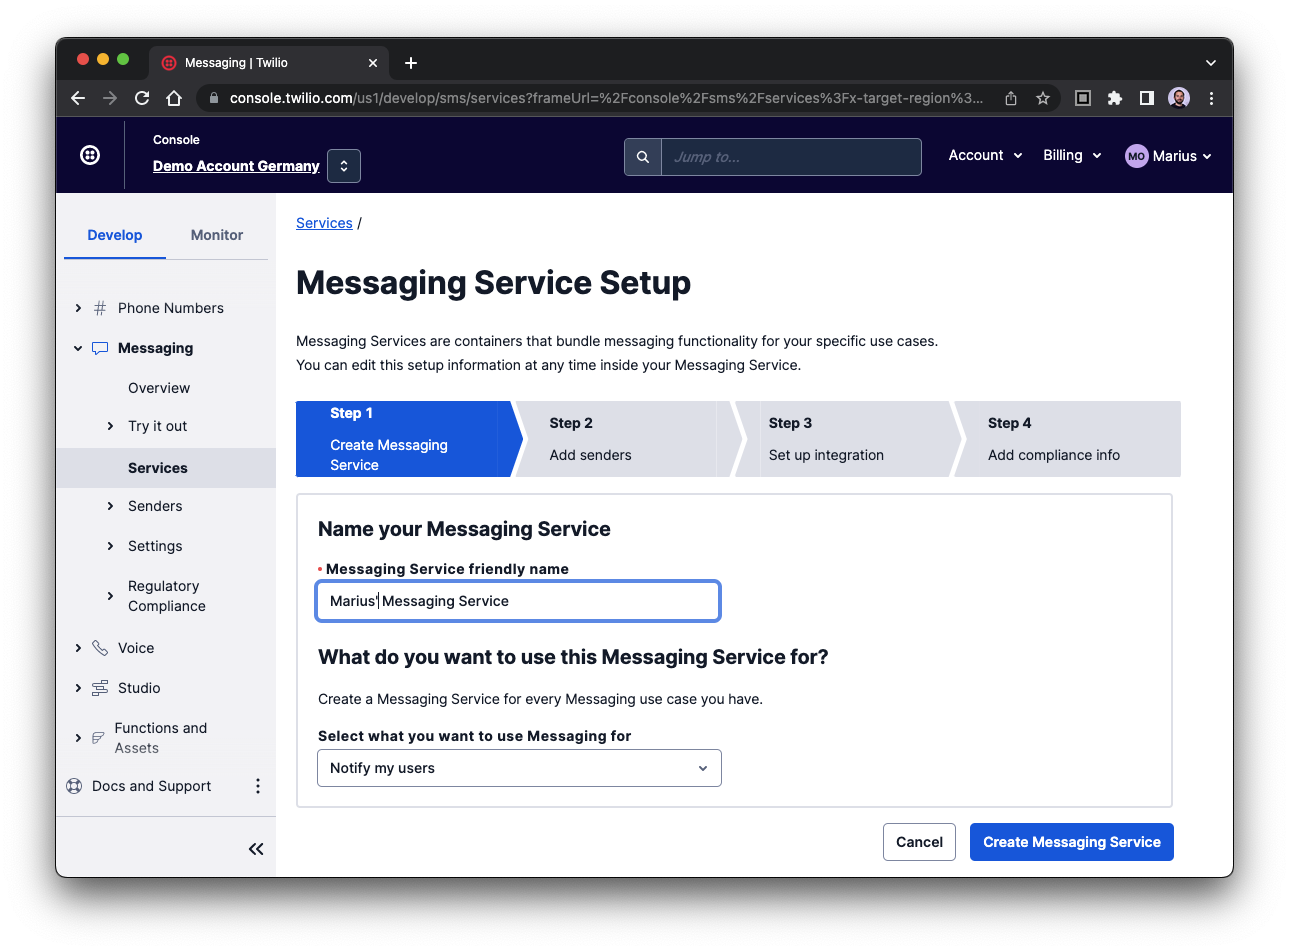 Screenshot of the first step to create a Messaging Service in the Twilio Console